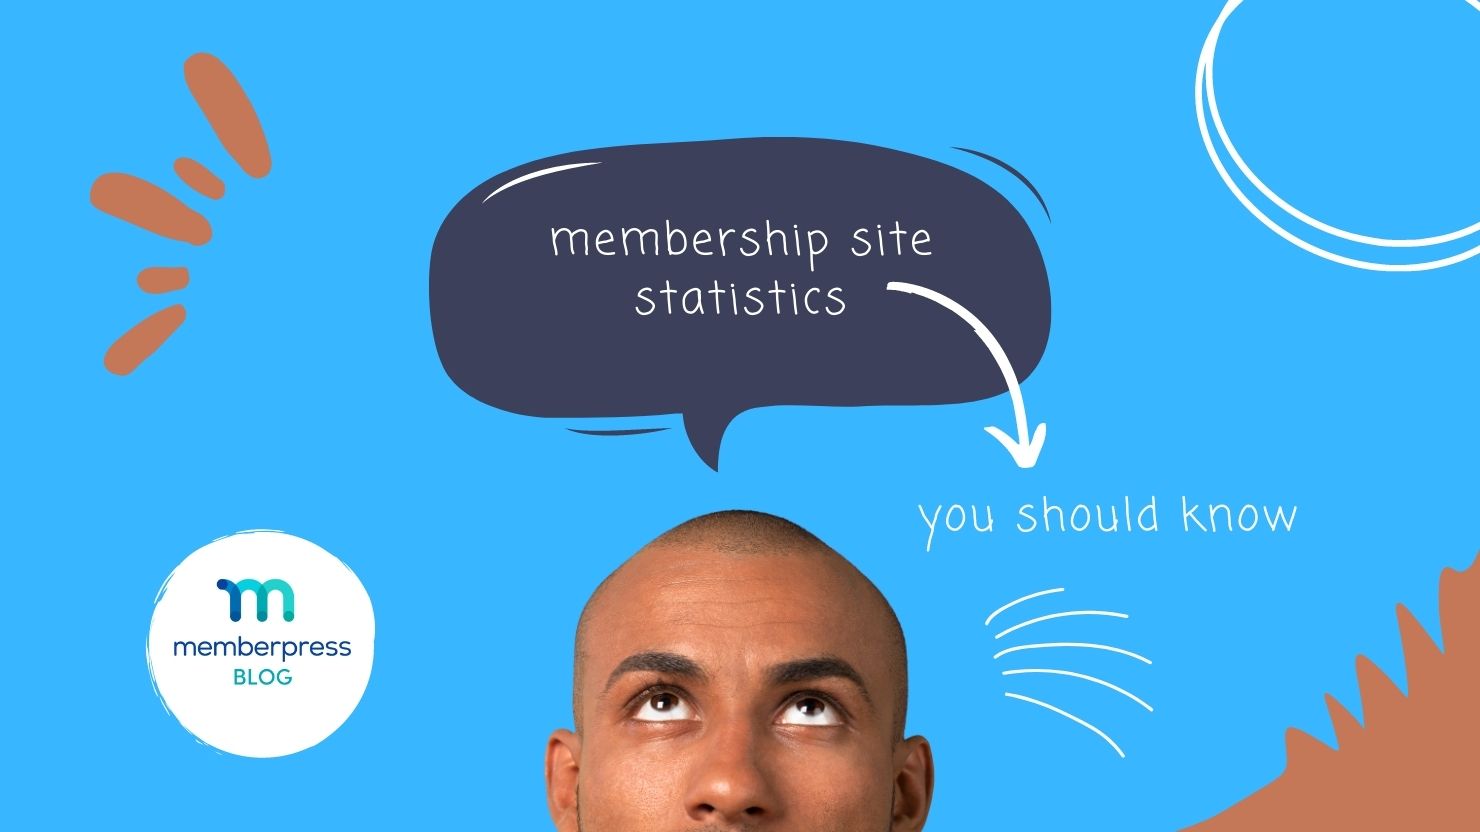 membership site statistics you should know